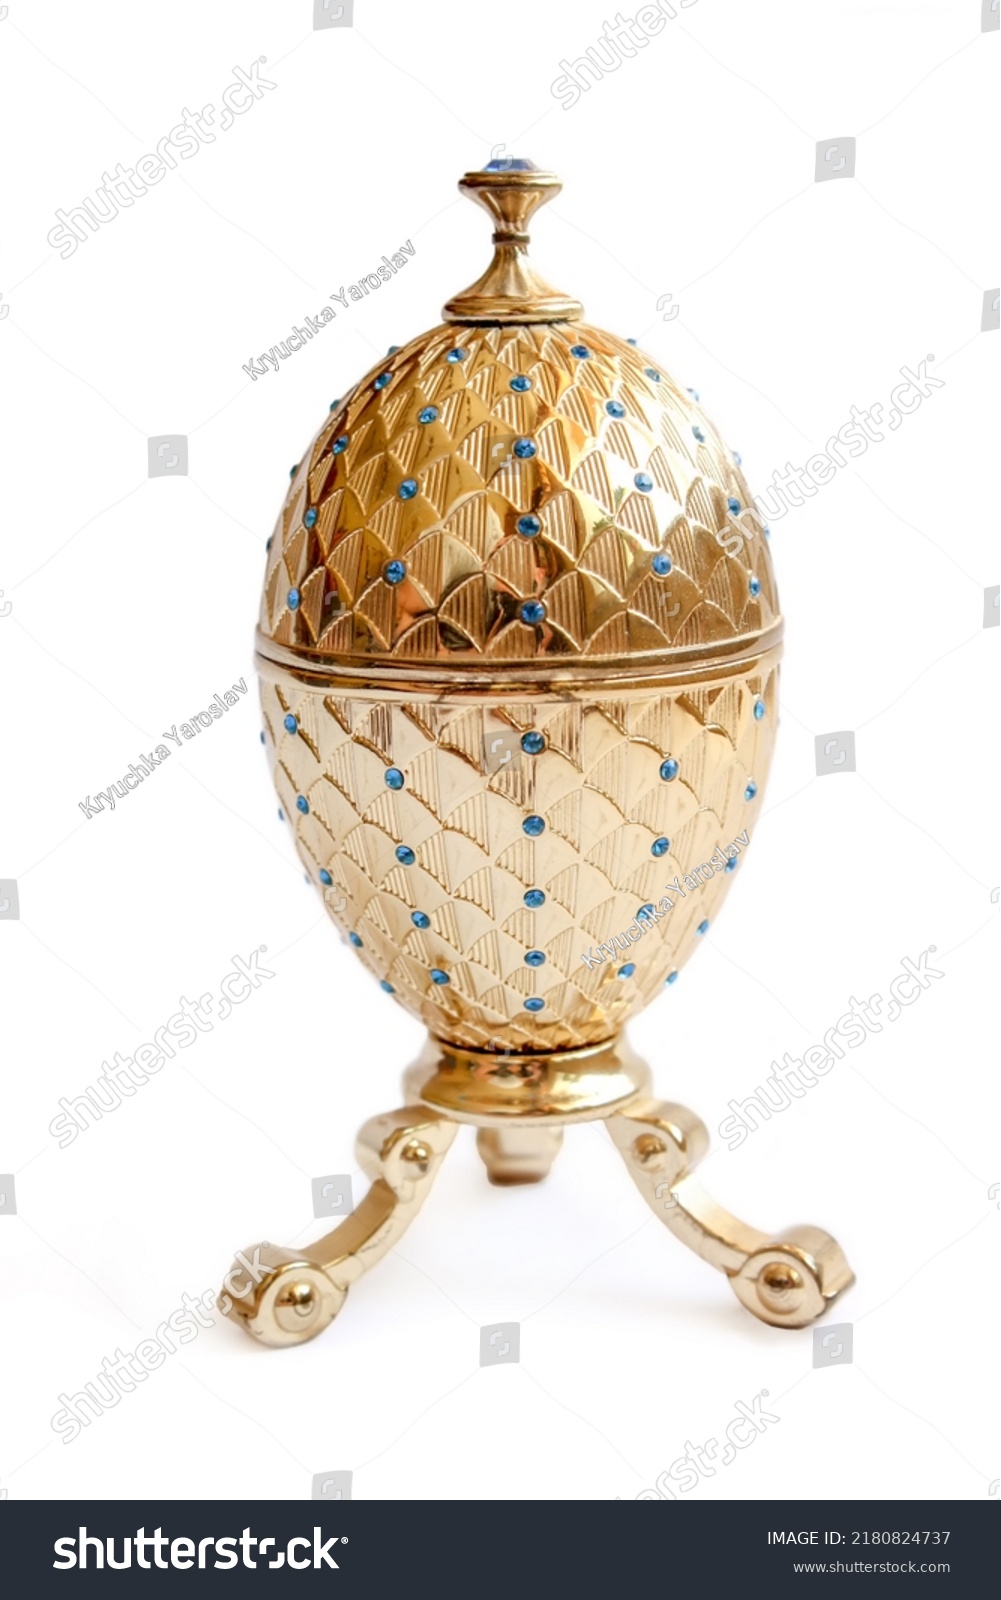 Luxury item - precious jewelry golden Faberge eggs. Decorative ceramic easter egg for jewellery. Egg isolated on white background #2180824737